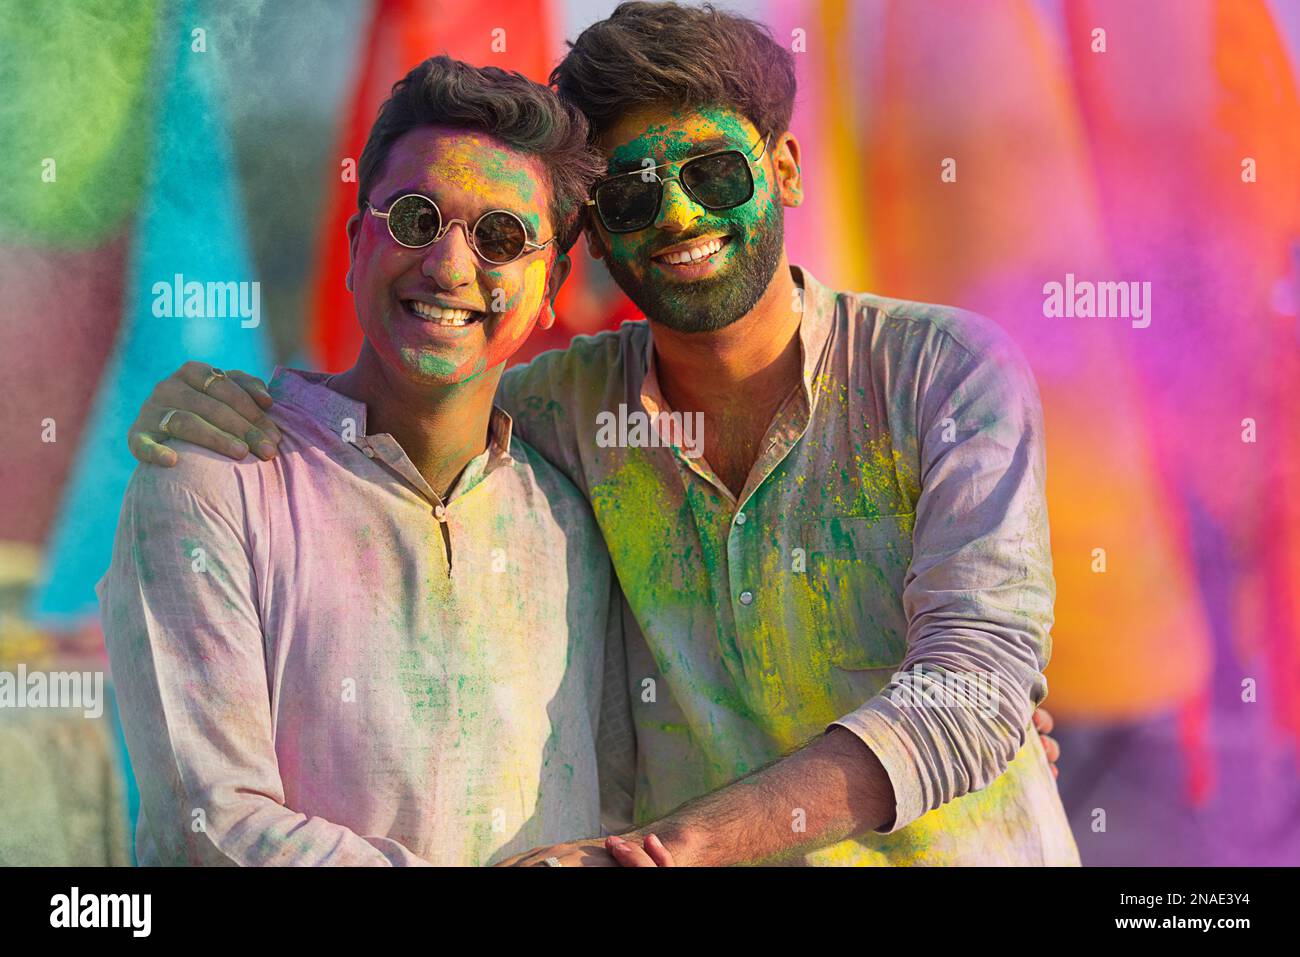 close-up portrait of smiling young men with colourful face and sunglass on holi Stock Photo